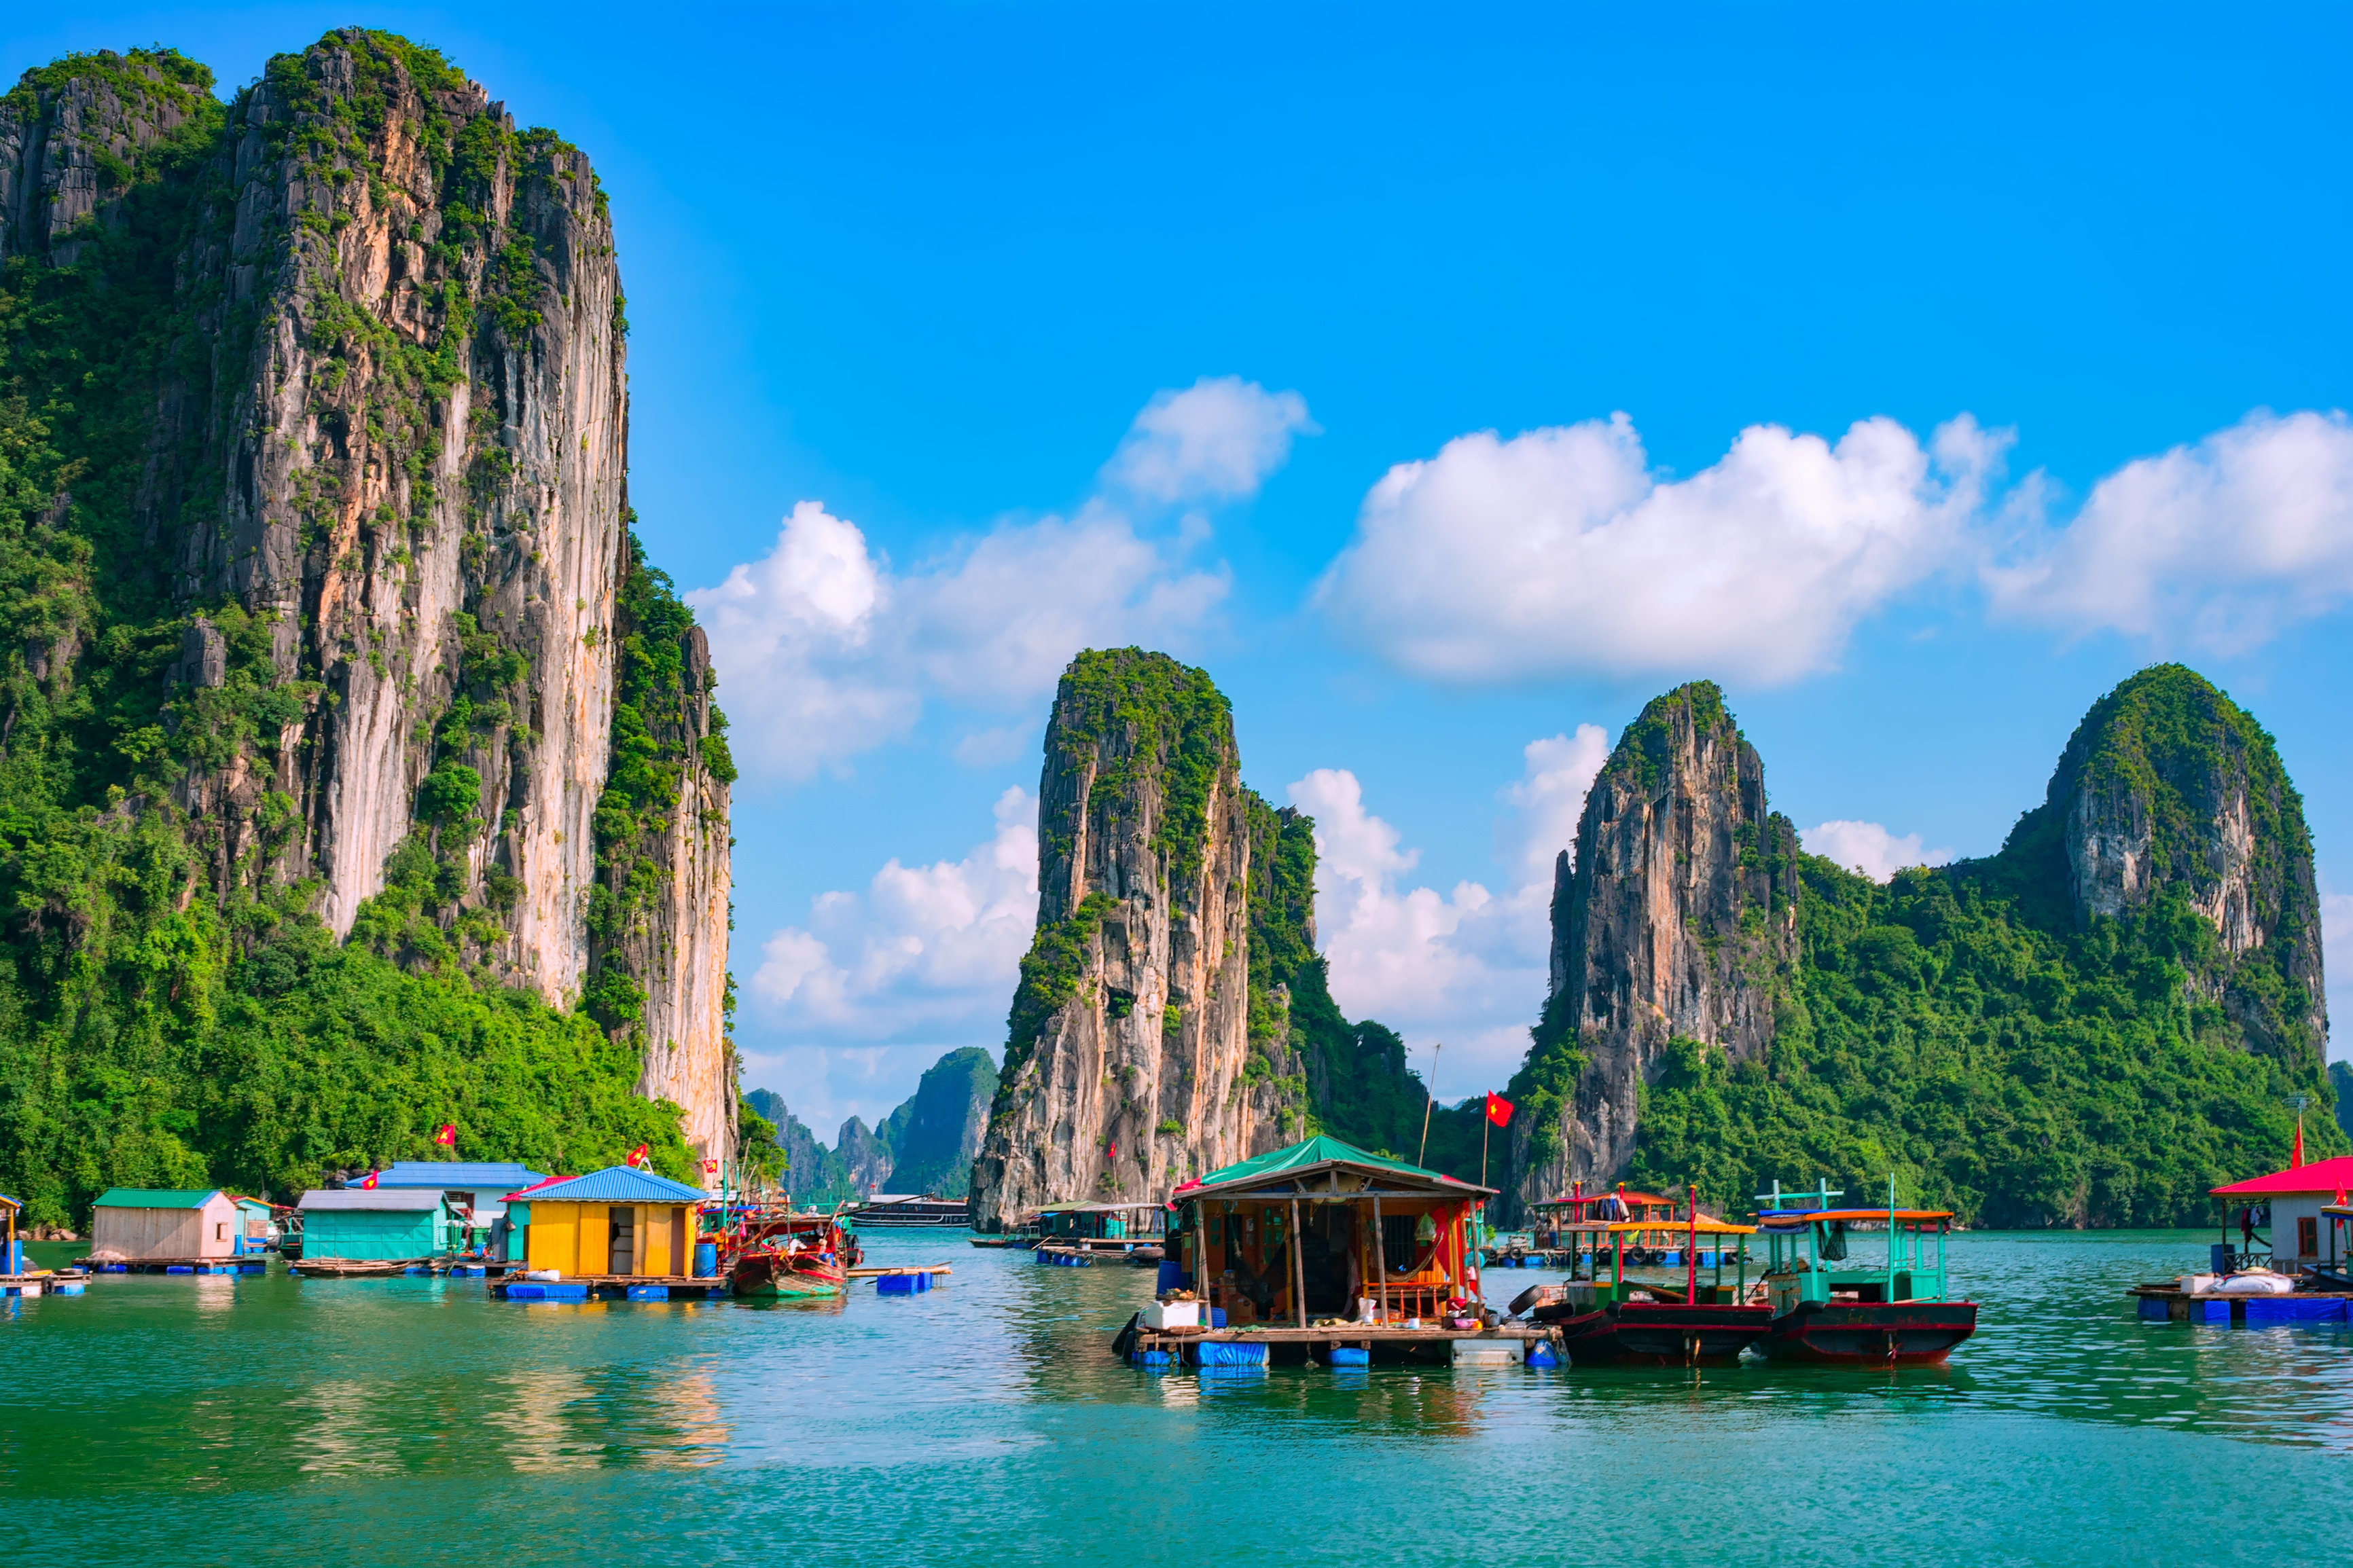 Round-trip flights to Vietnam and Singapore from the $400s